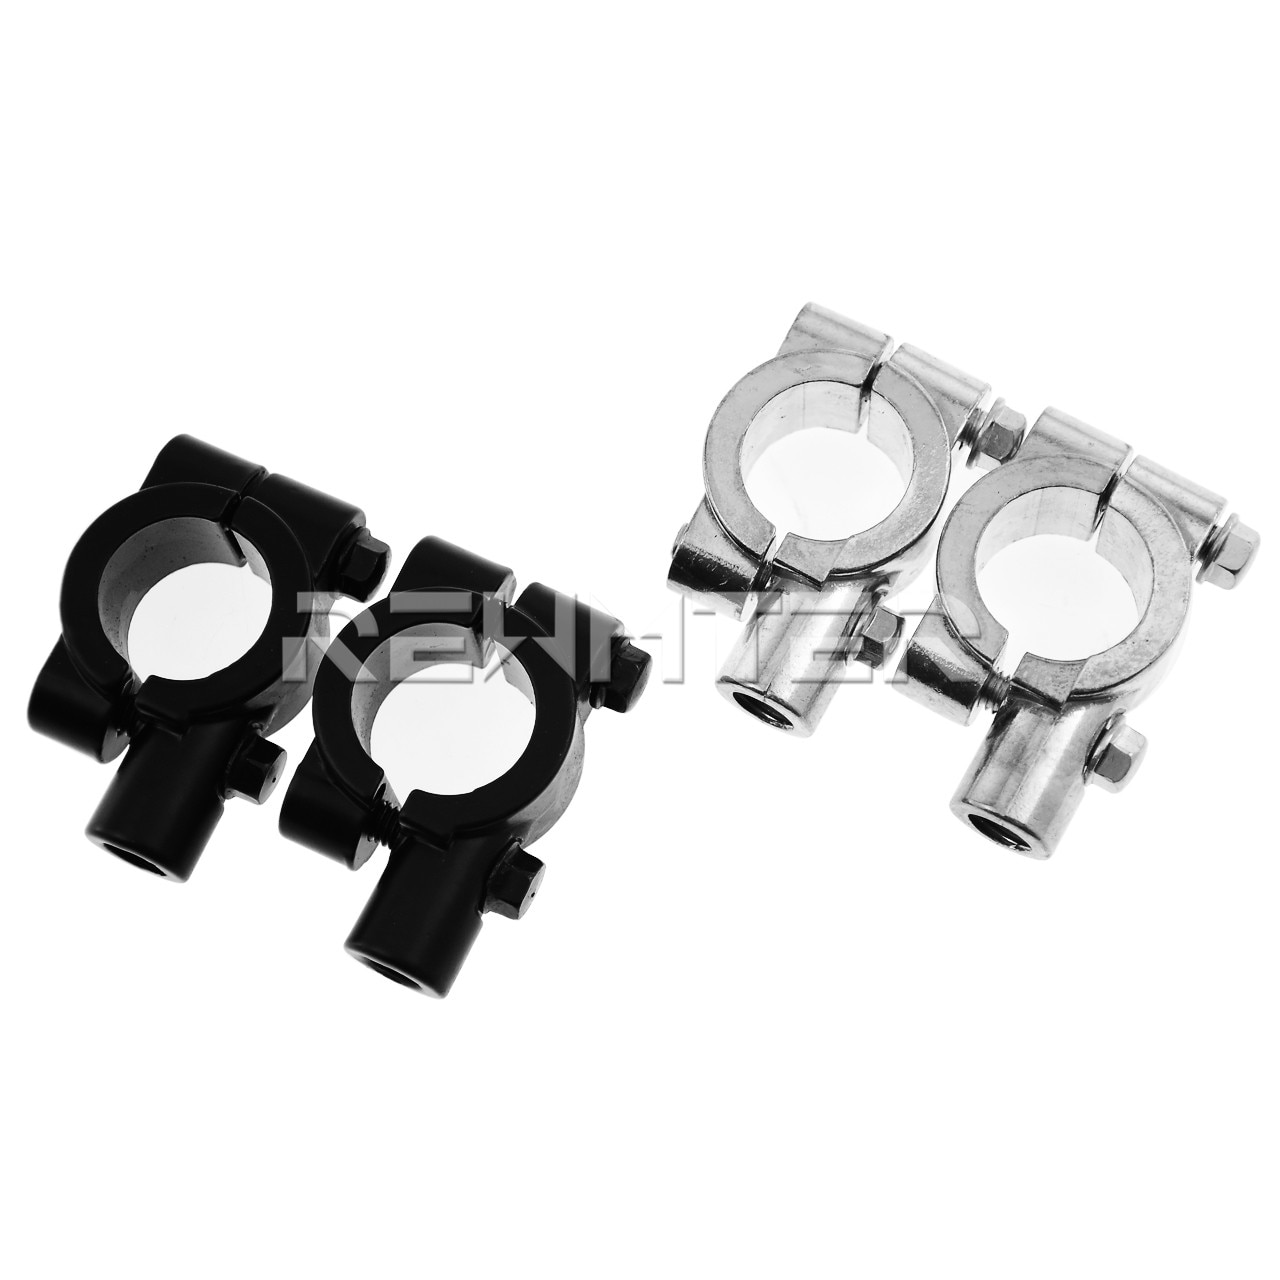 2PCS-Black-Silver-Motorcycle-accessories-Mirror-Mount-Clamp-Rear-View-Mirror-Holder-Size-22mm-10mm-8mm-2